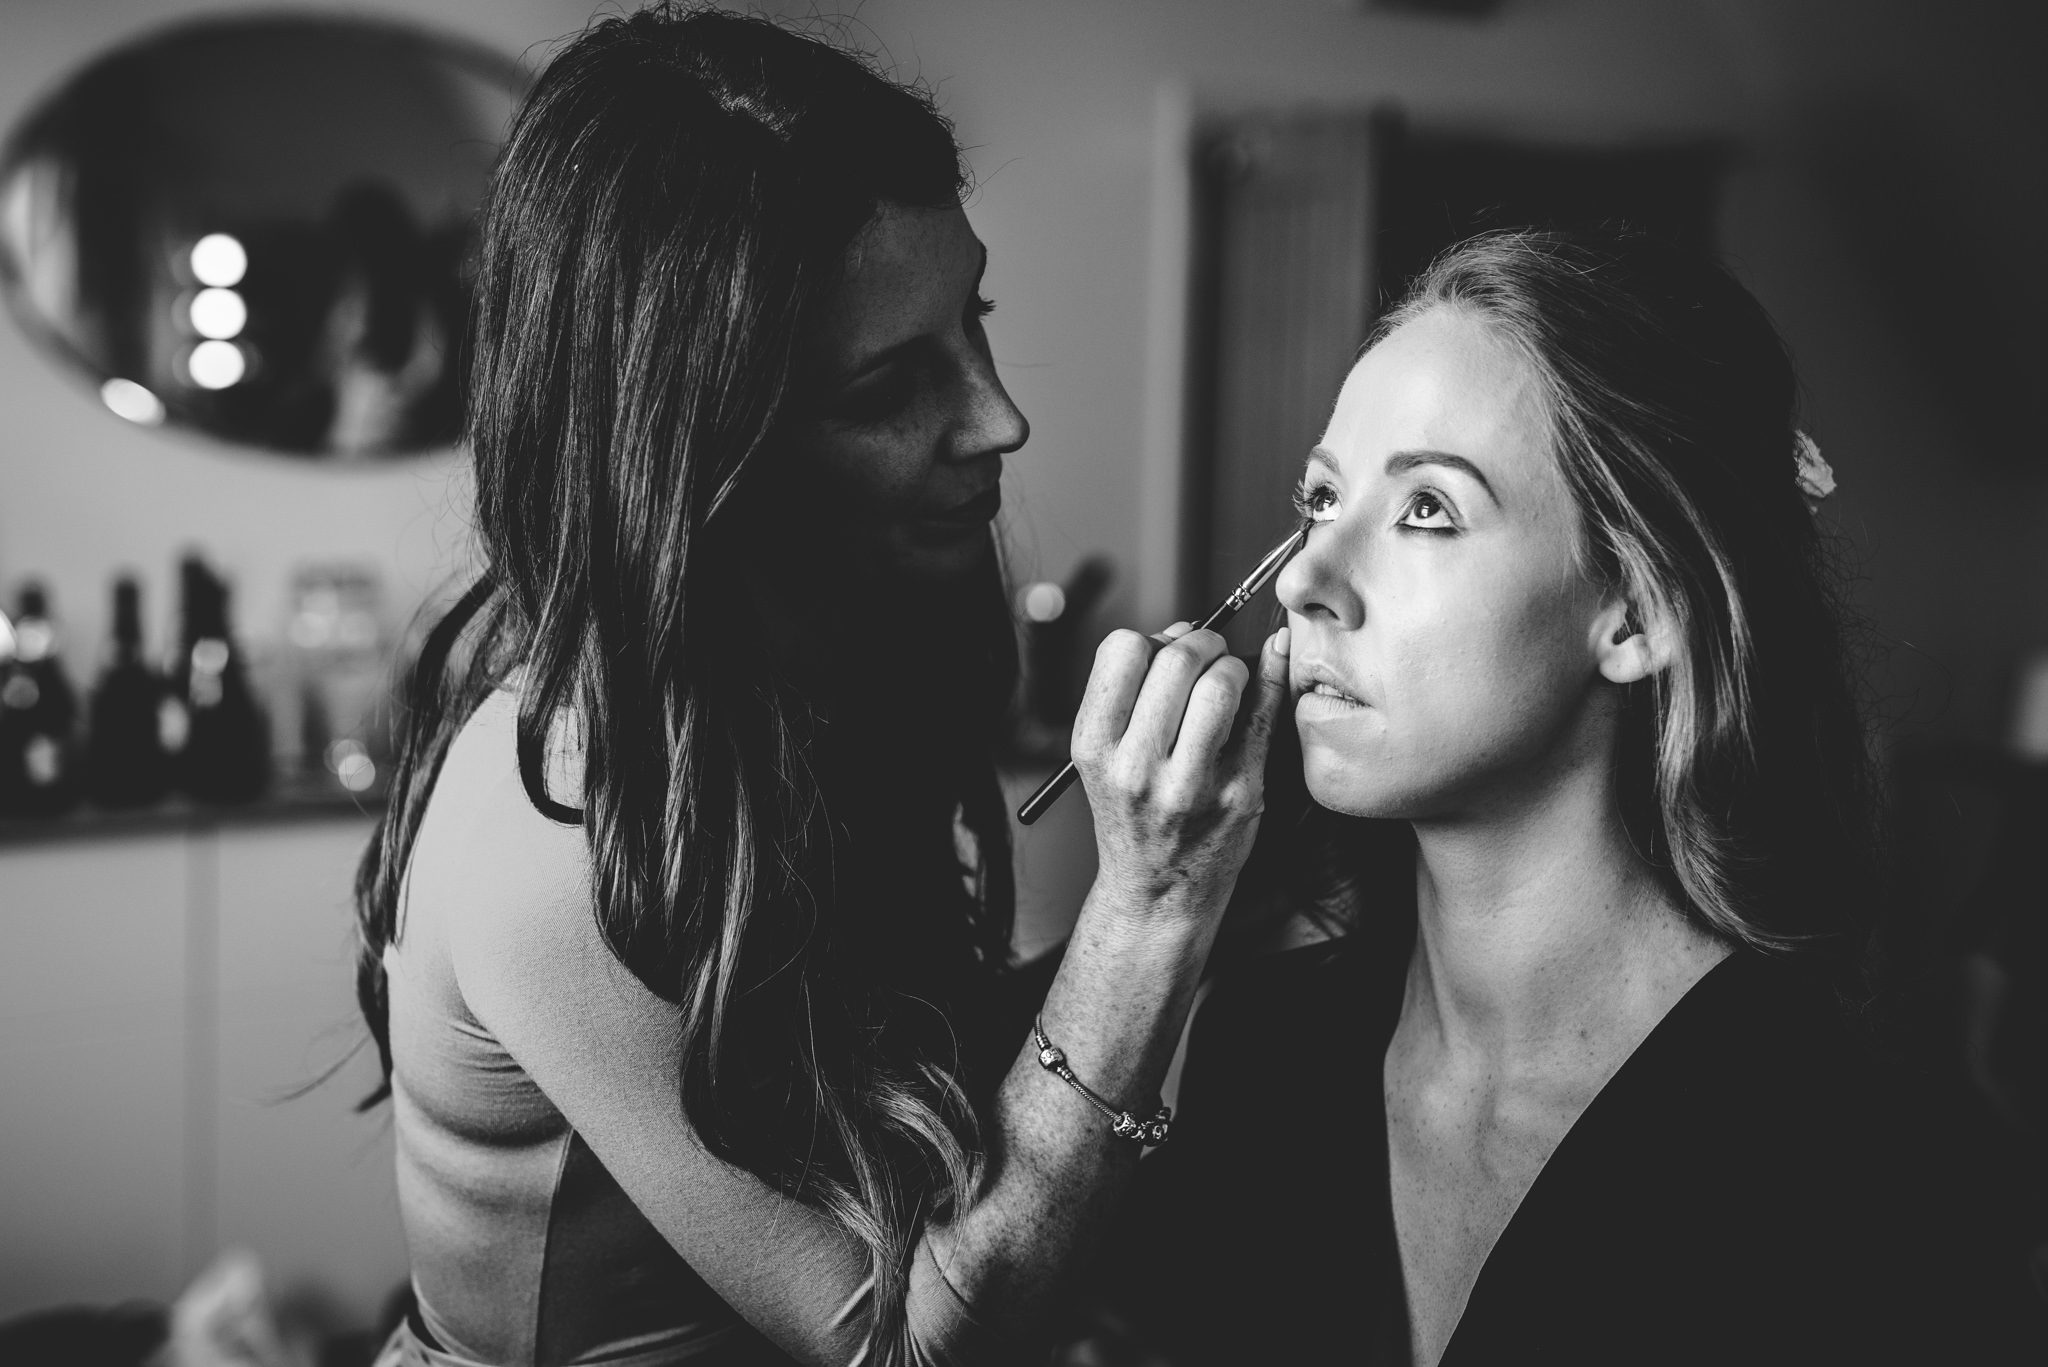 Make up being applied by Katy Pheiffer